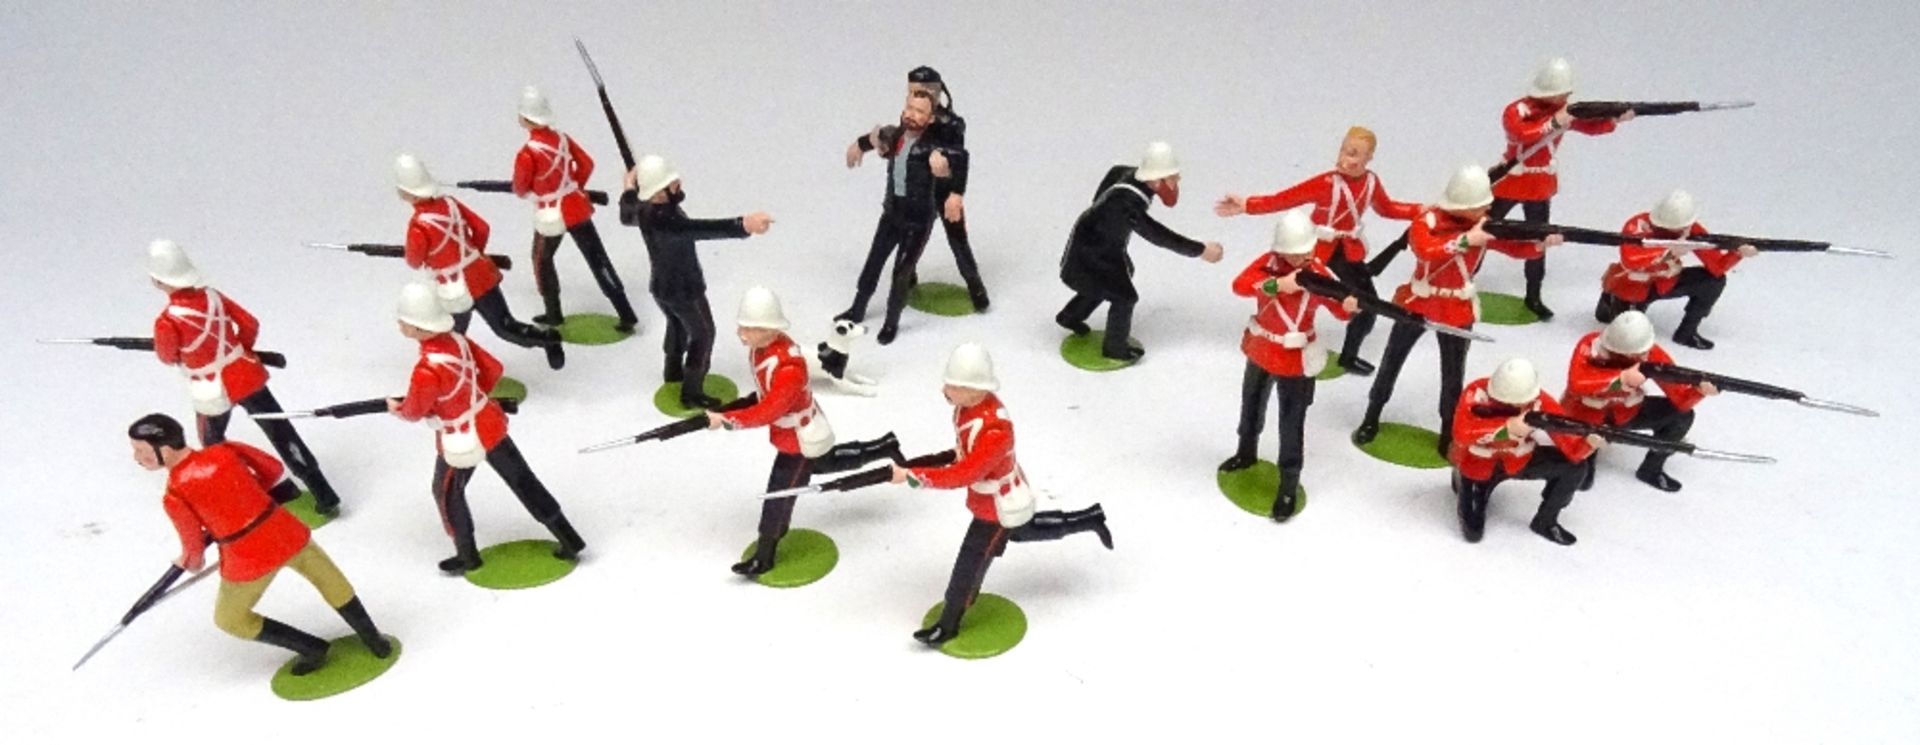 Imperial Productions set 41, The Brave Defenders of Rorkes Drift - Image 7 of 7